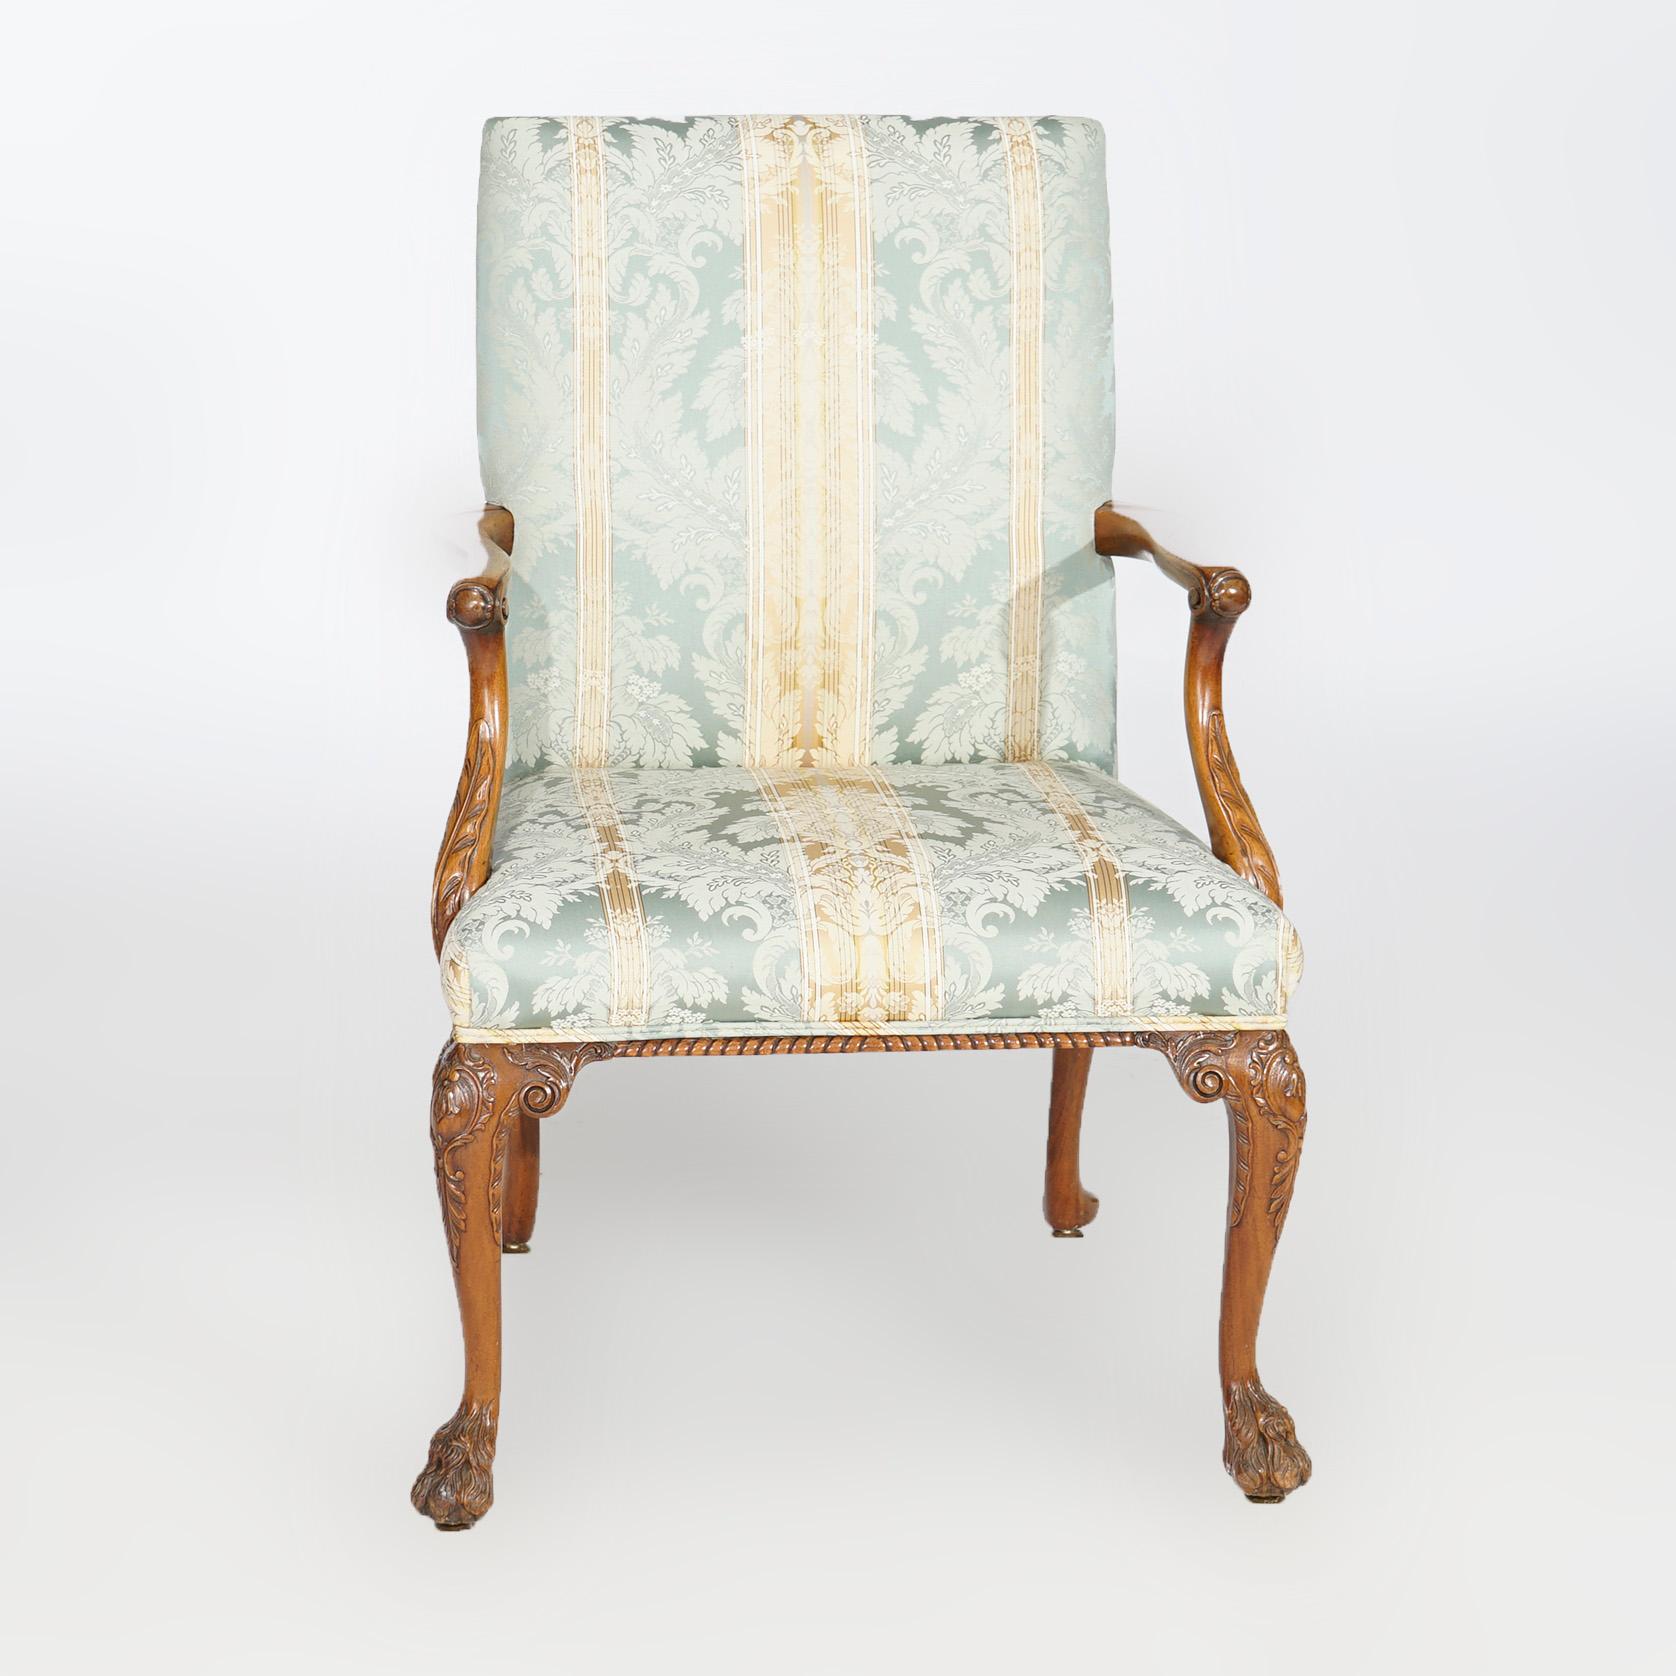 An antique English lolling chair offers upholstered seat and square back on walnut frame with scroll form arms, carved knees and hairy paw feet, 19th century

Measures- 39''H x 27.25''W x 27''D.

Catalogue Note: Ask about DISCOUNTED DELIVERY RATES